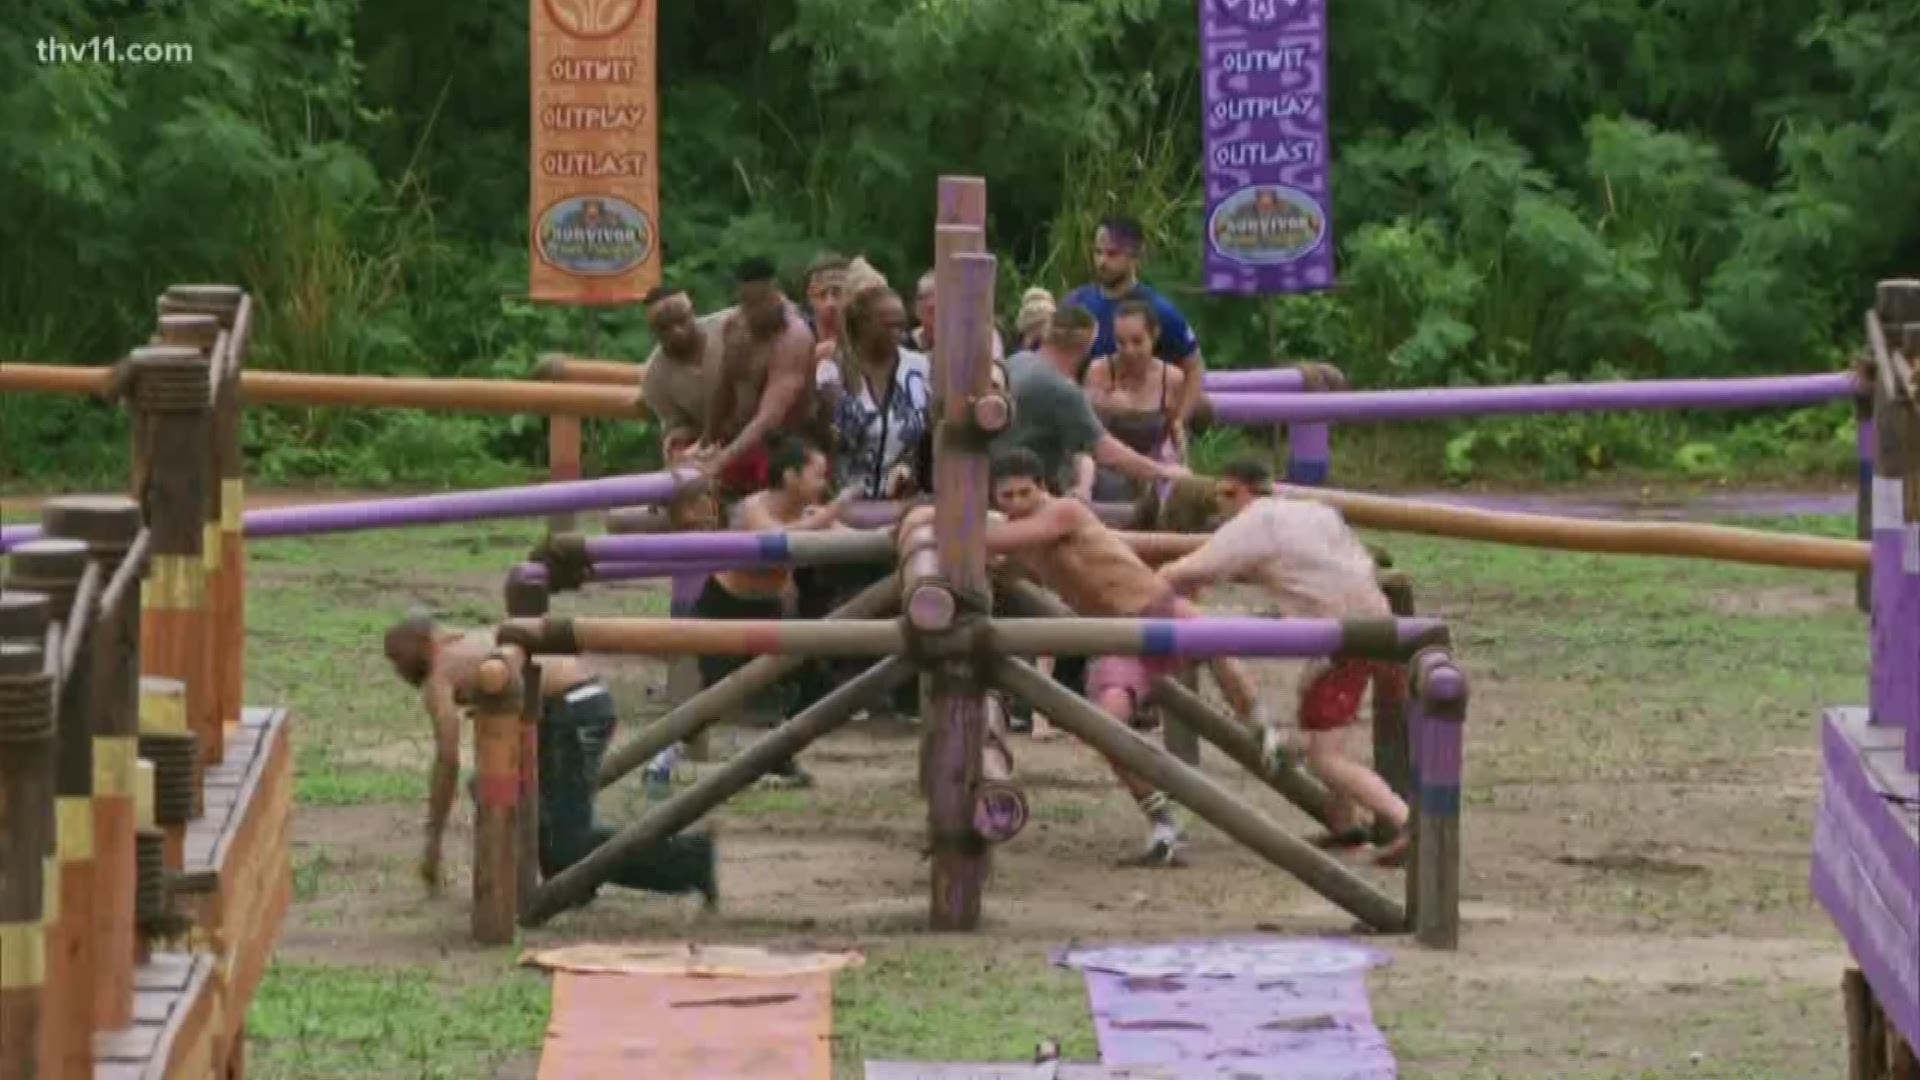 THV11's very own Craig O'Neil explores why Survivor is more than a TV show.